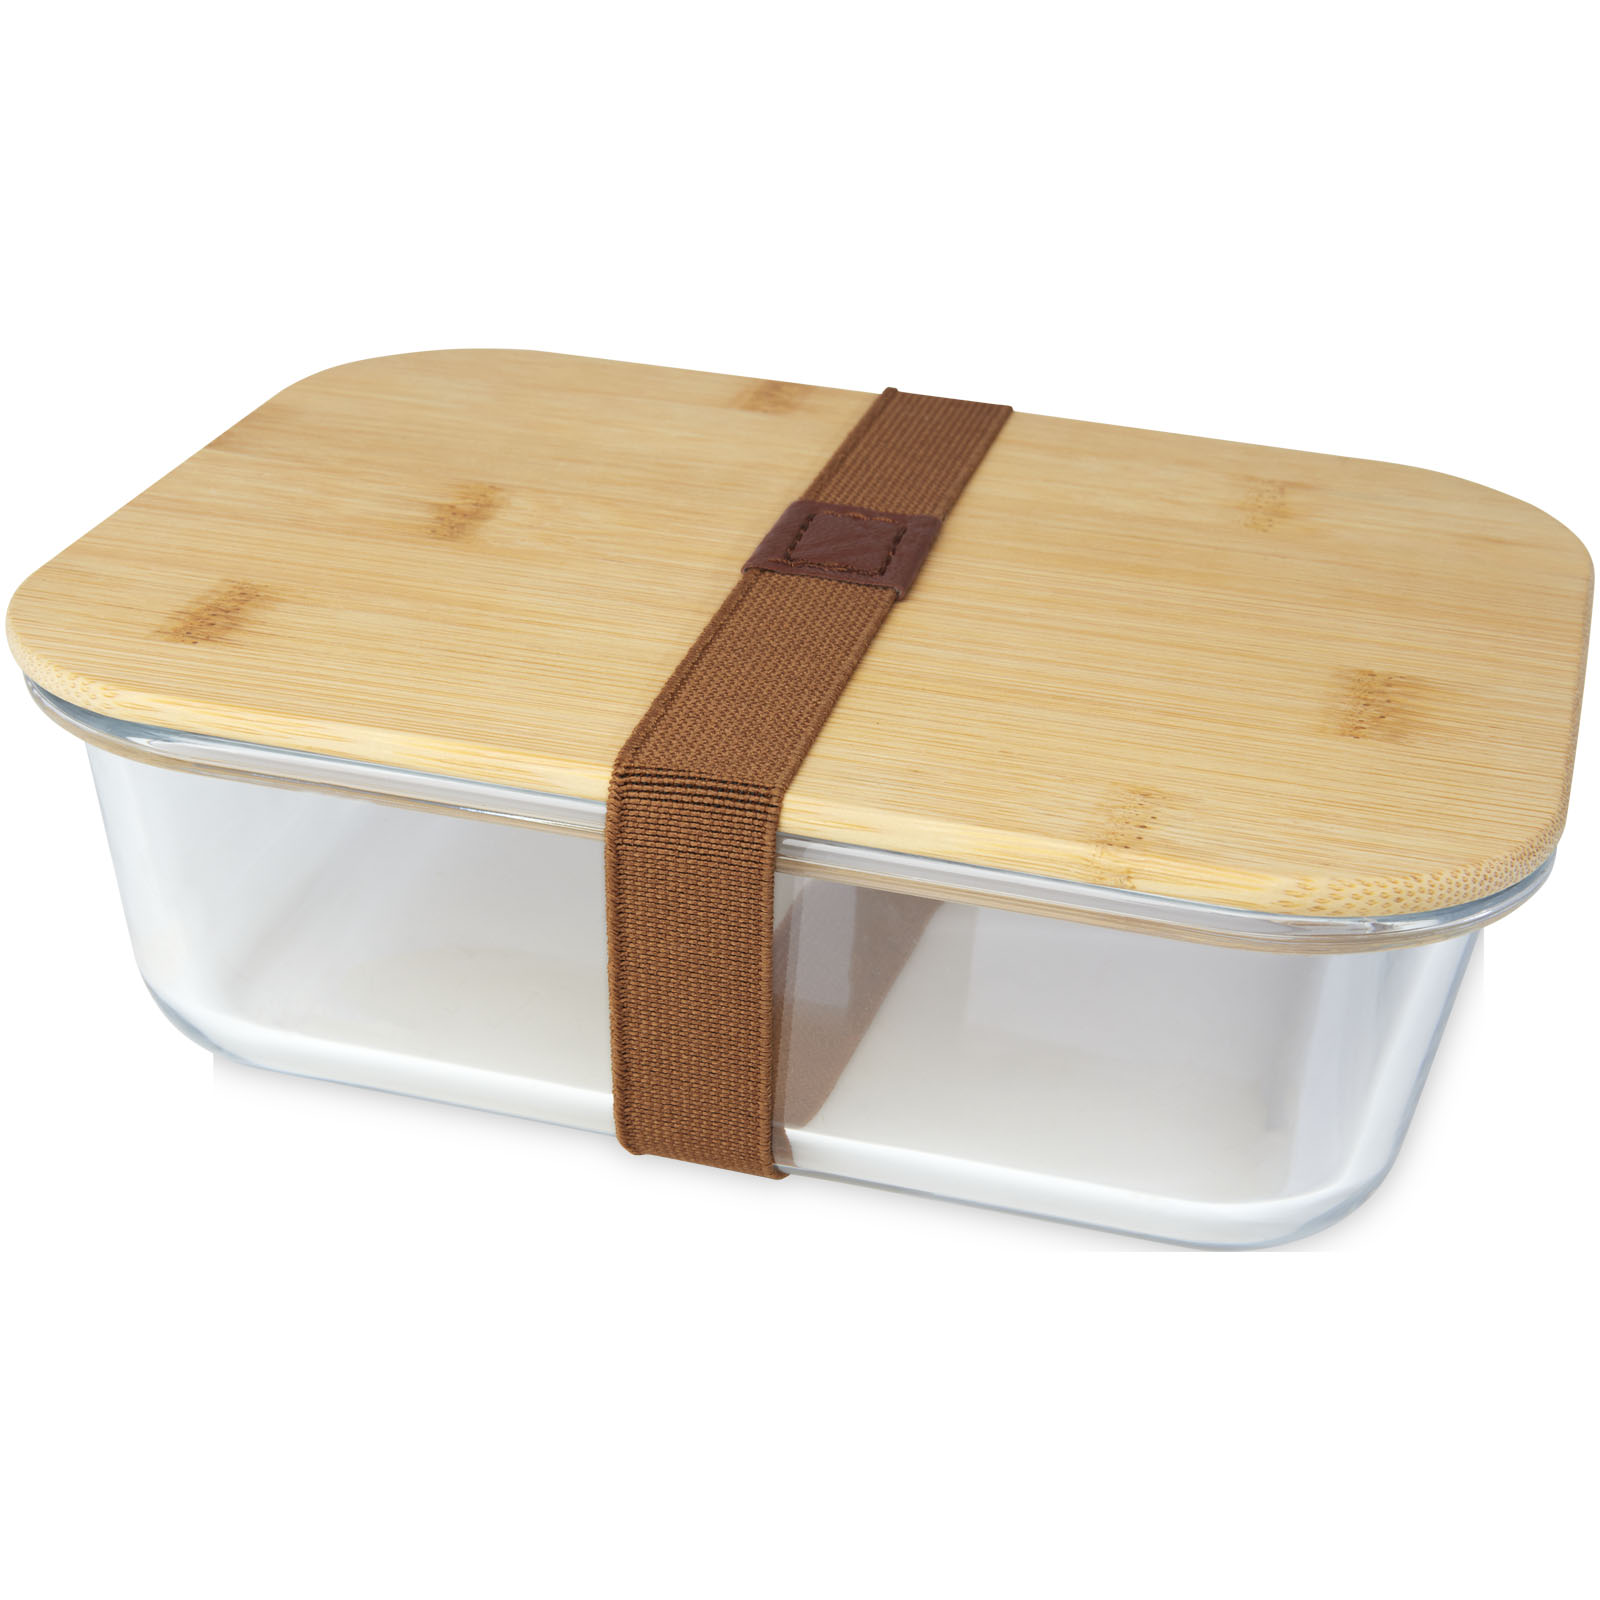 Lunch Boxes - Roby glass lunch box with bamboo lid